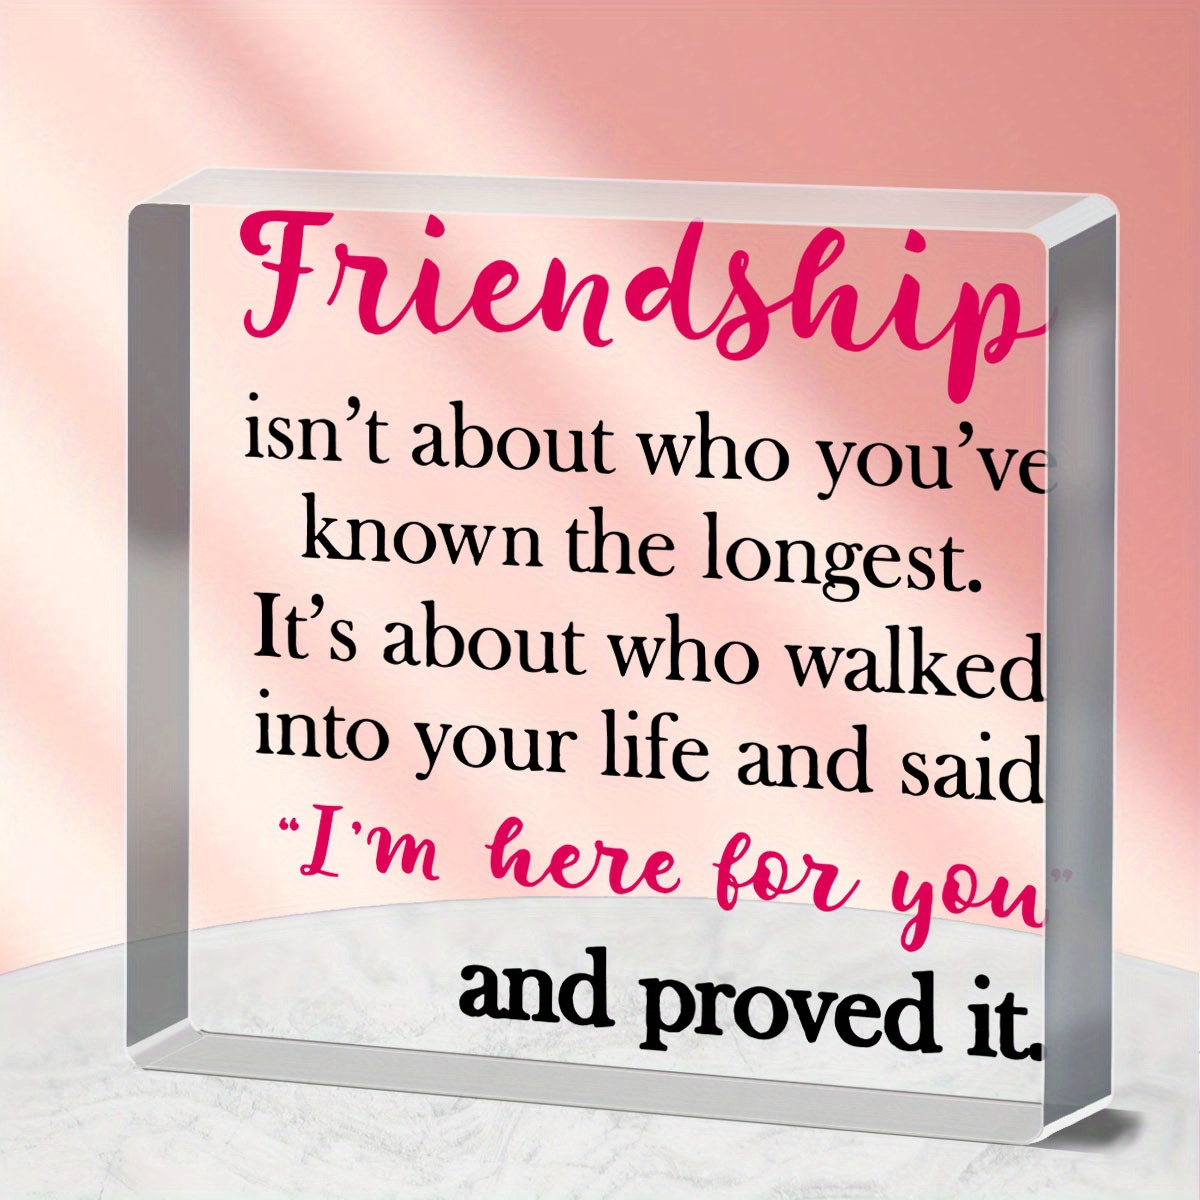 Friendship Gifts Friendship Isn't About Who You've Known the